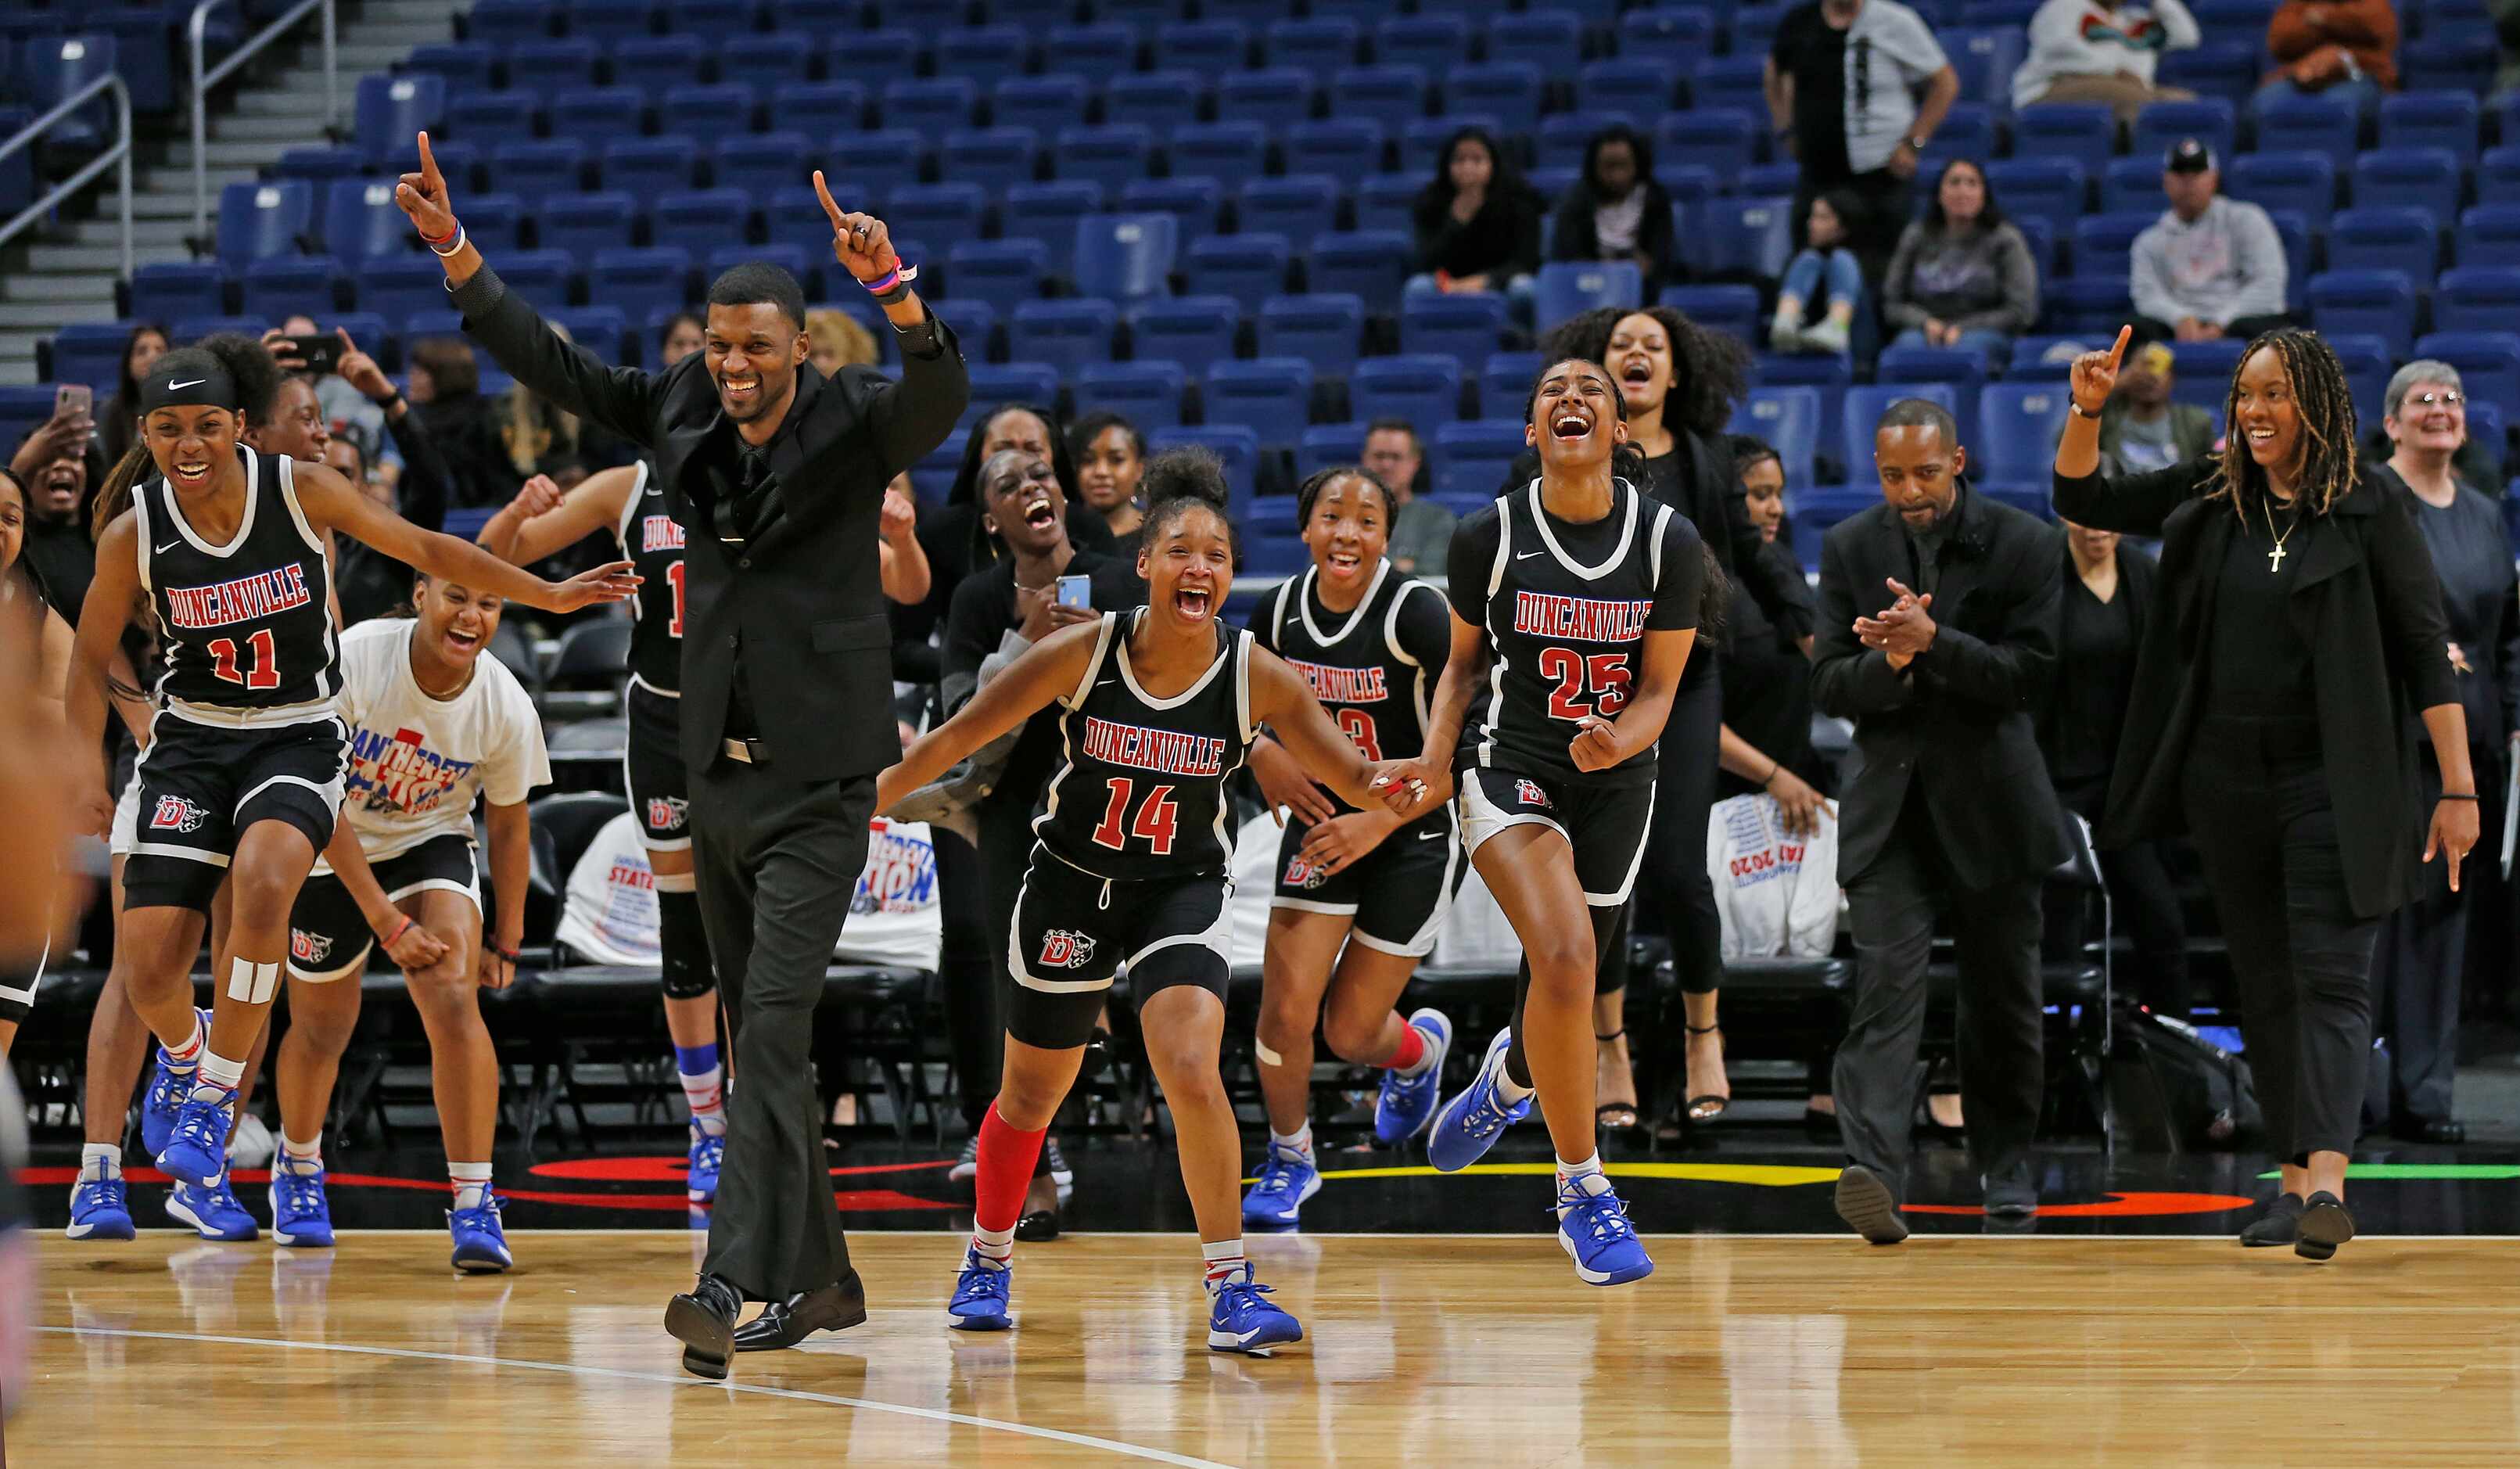 Duncanville runs the court as buzzer sounds in a 6A final on  Saturday, March 7, 2020 at the...